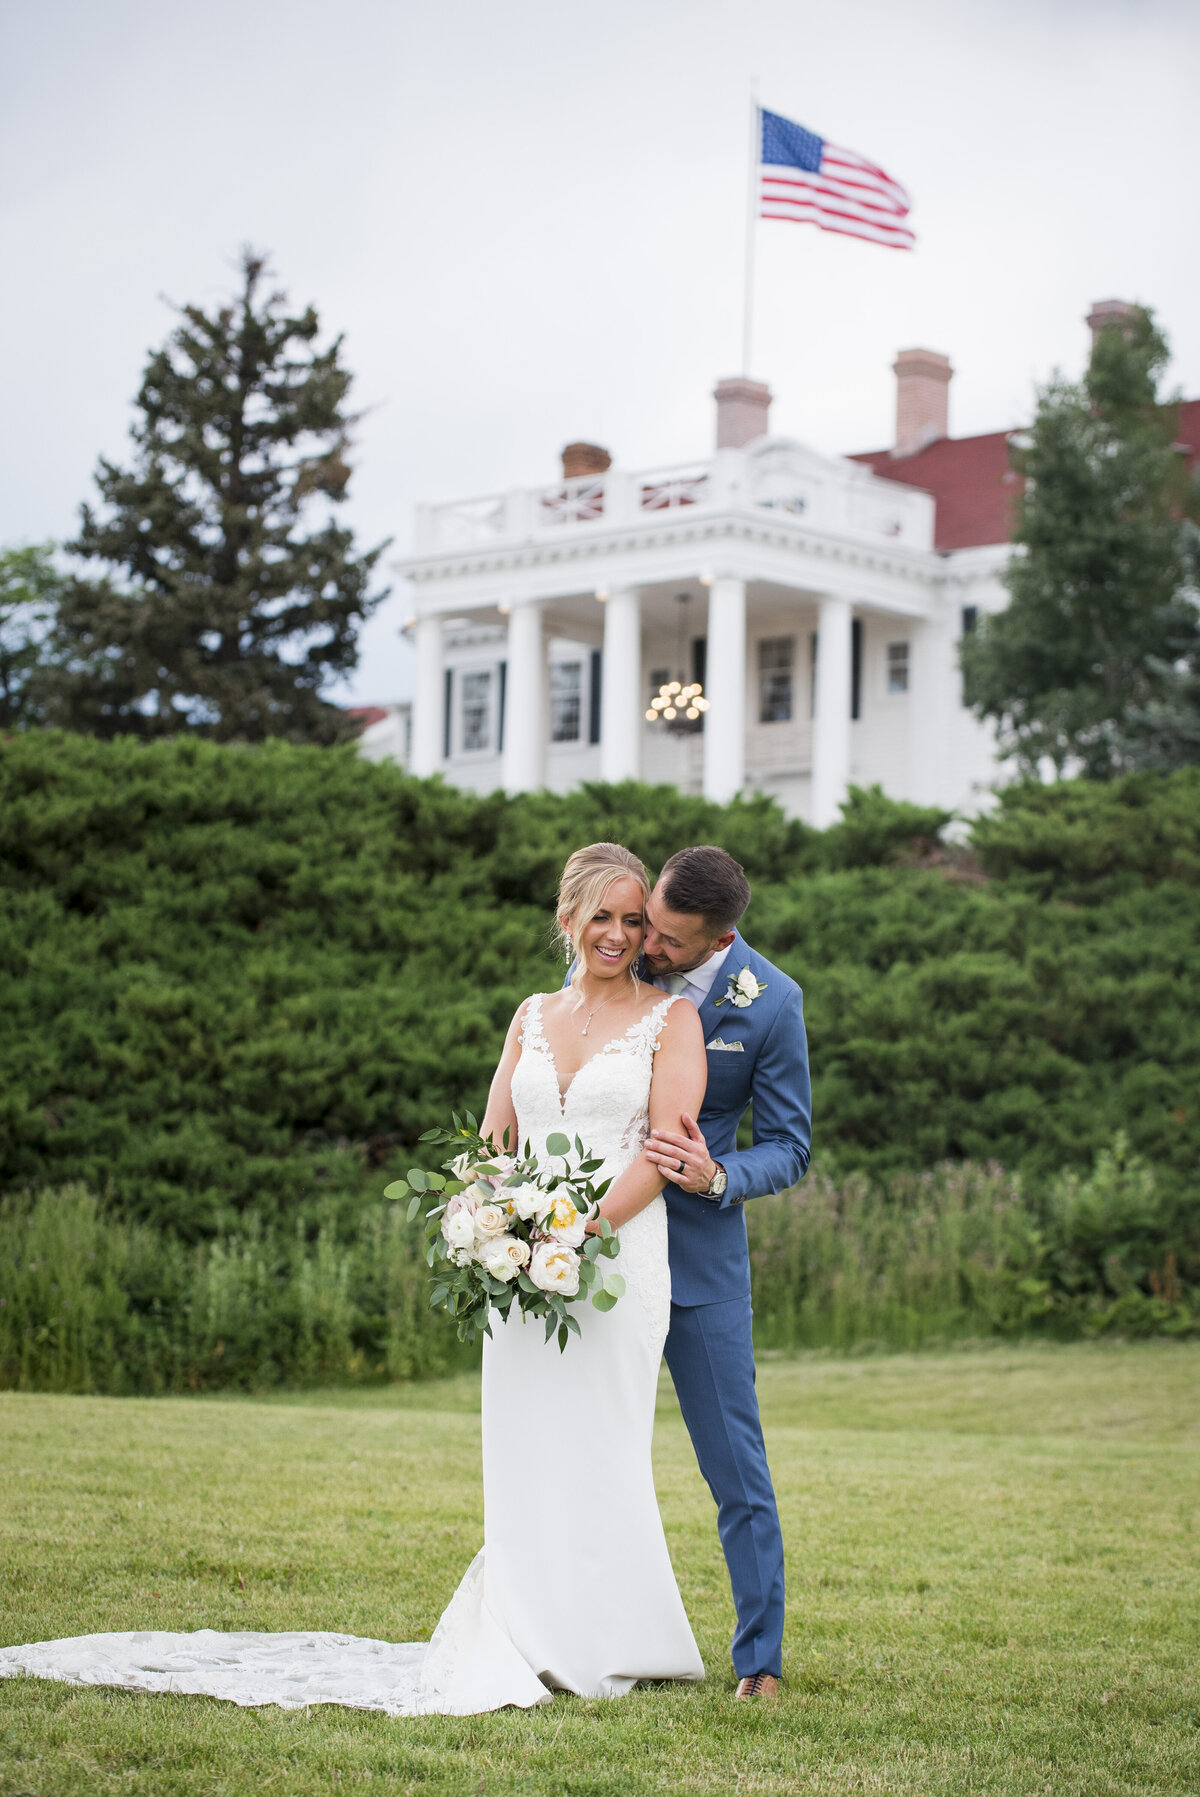 A groom kisses his bride from behind with The Manor House in the background.